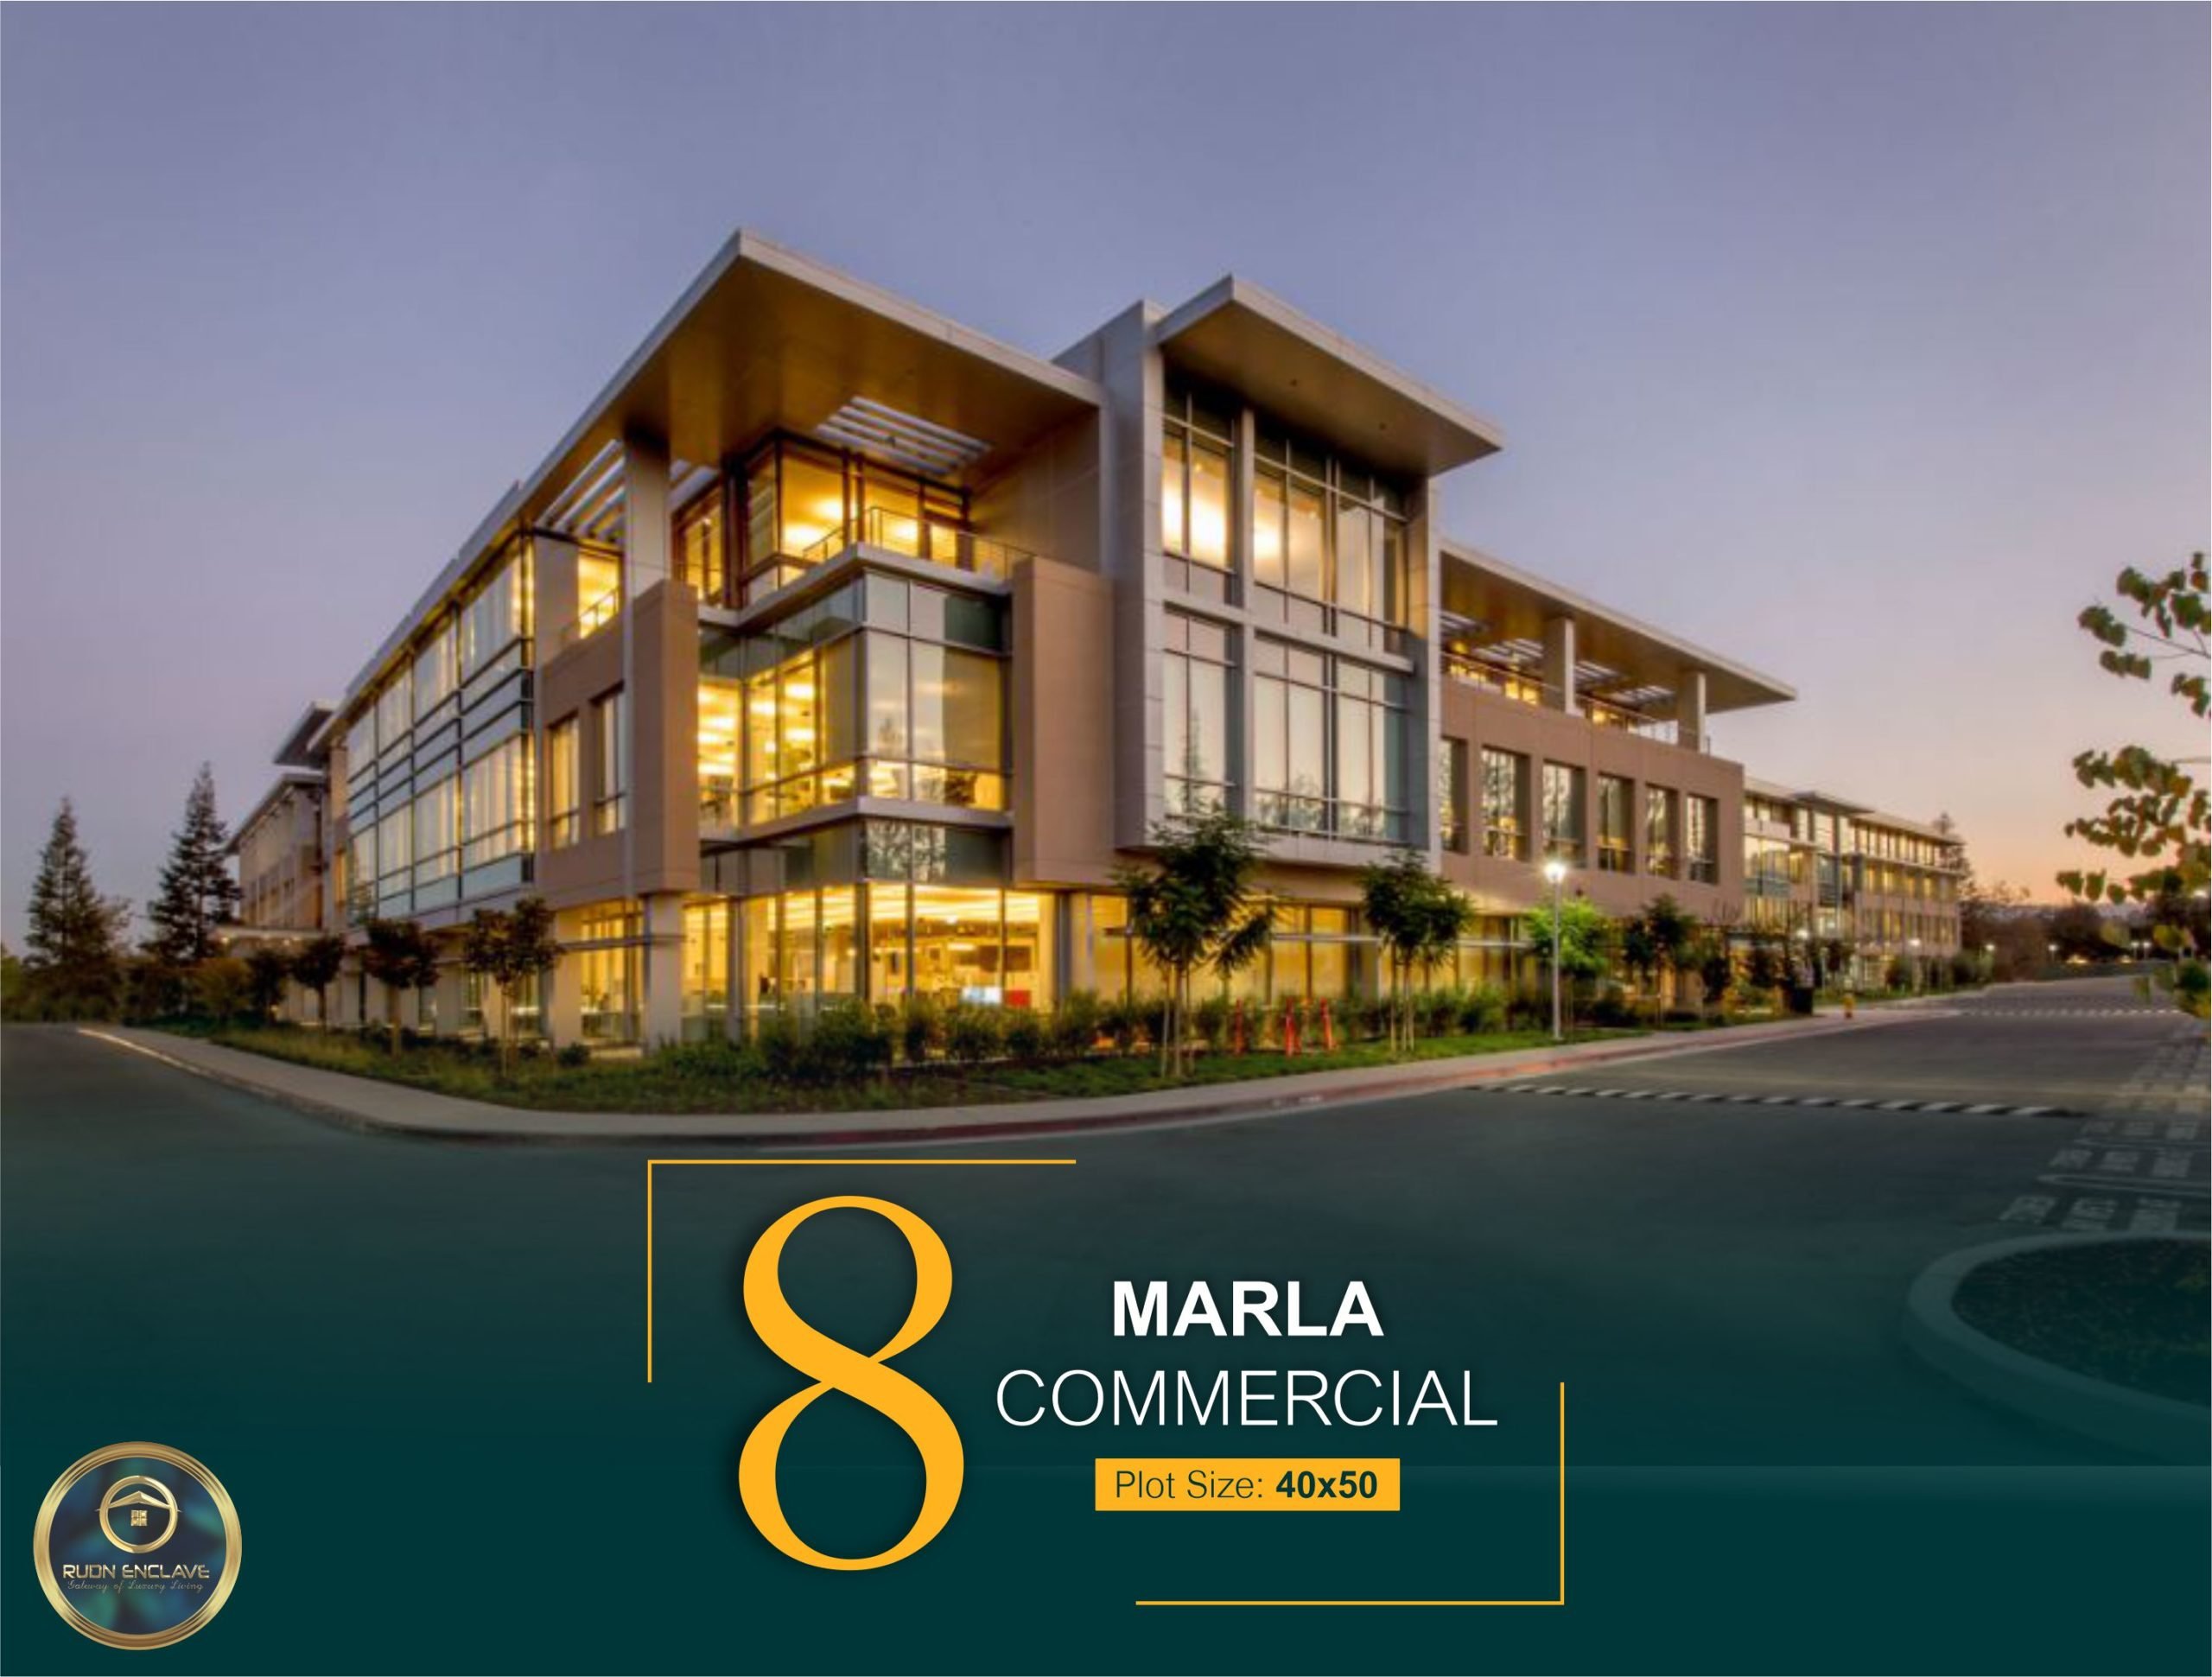 RUDN Enclave 8-Marla-Commercial-scaled